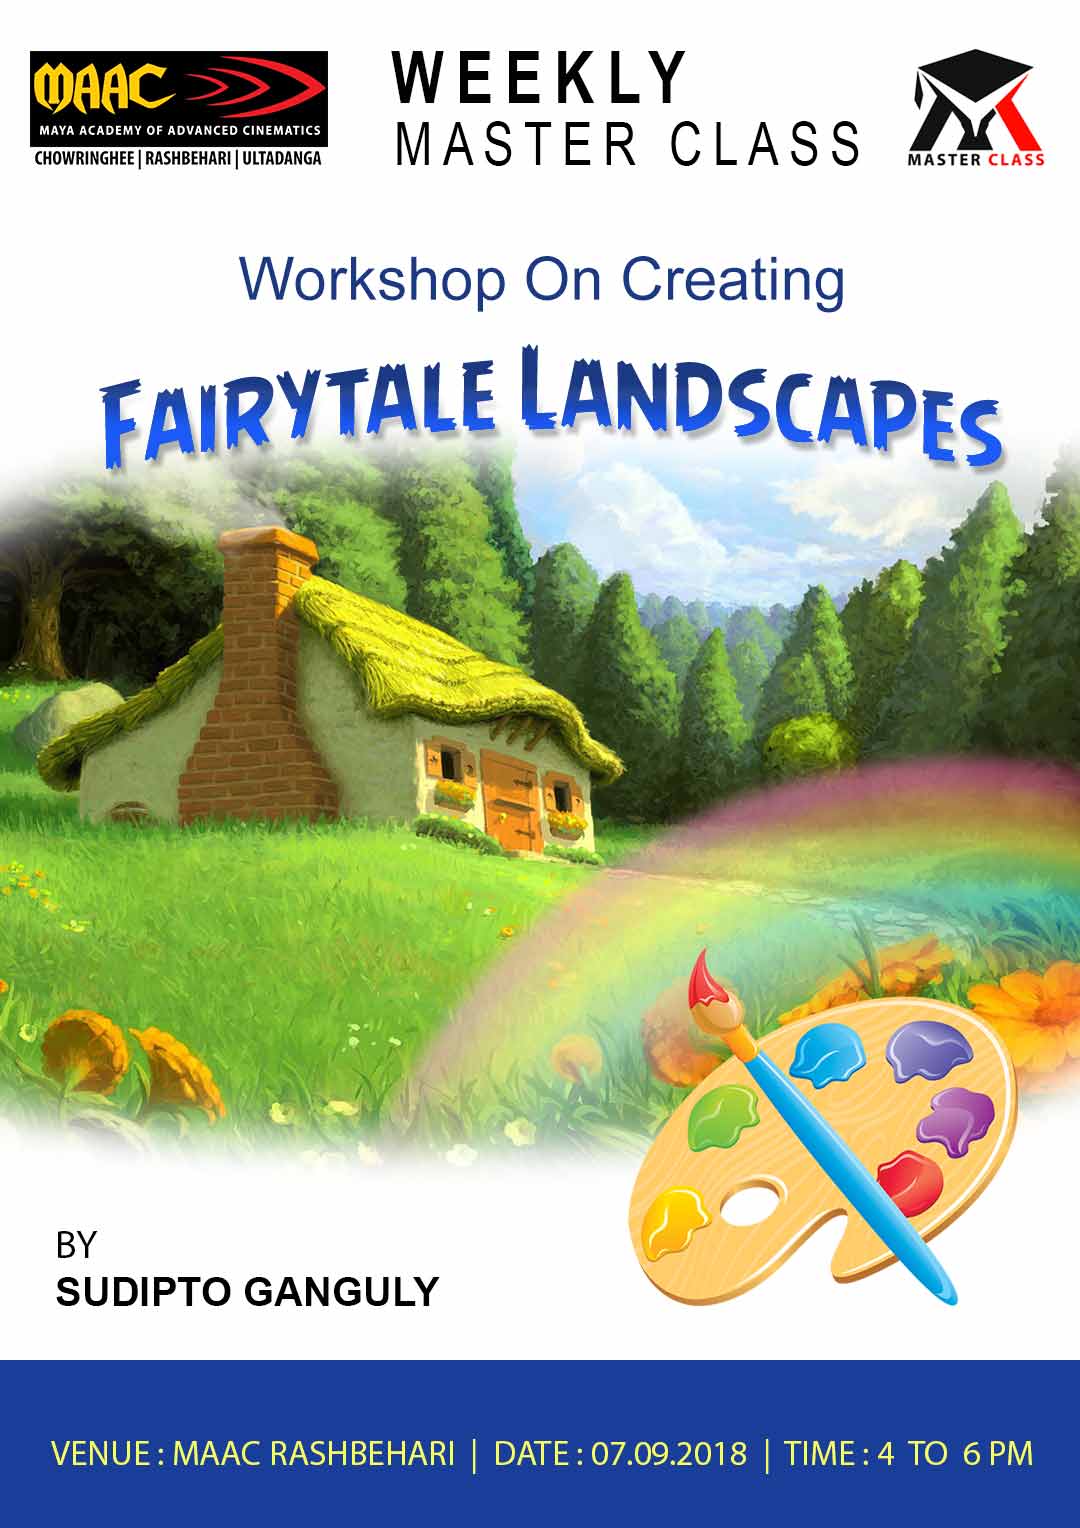 Weekly Master Class on Workshop On Creating Fairytale Landscapes